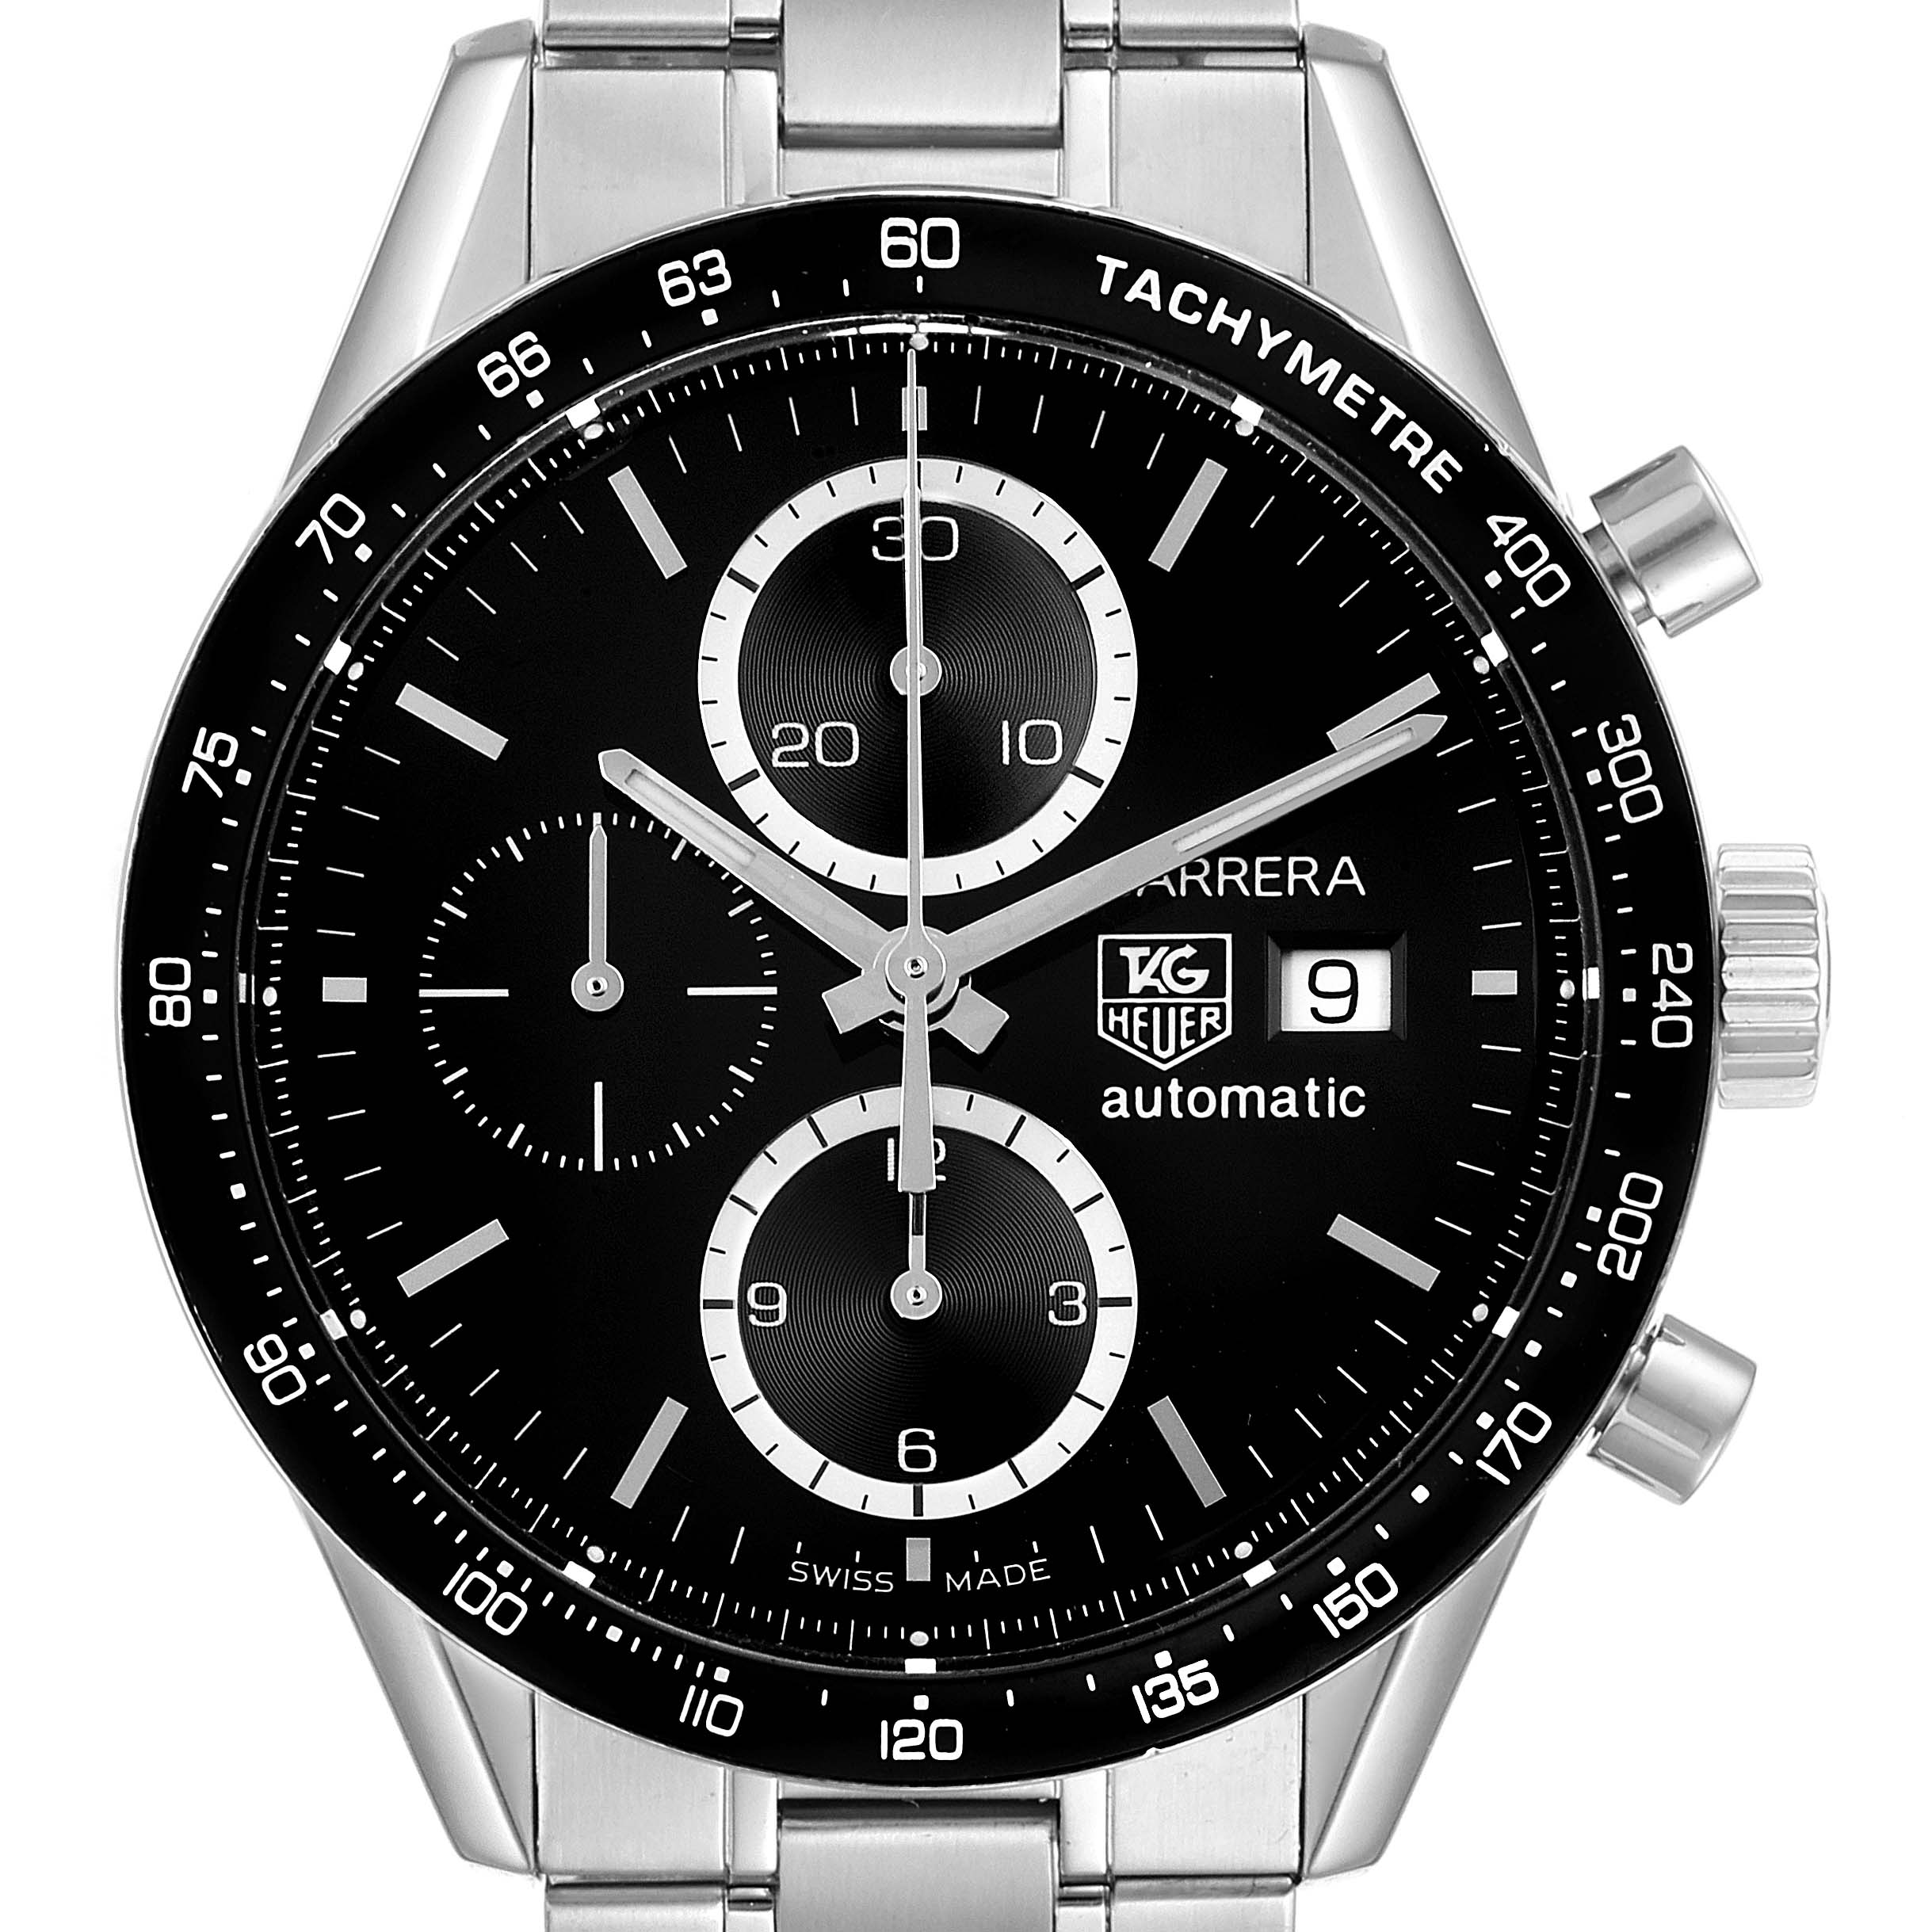 Tag heuer tachymeter watch